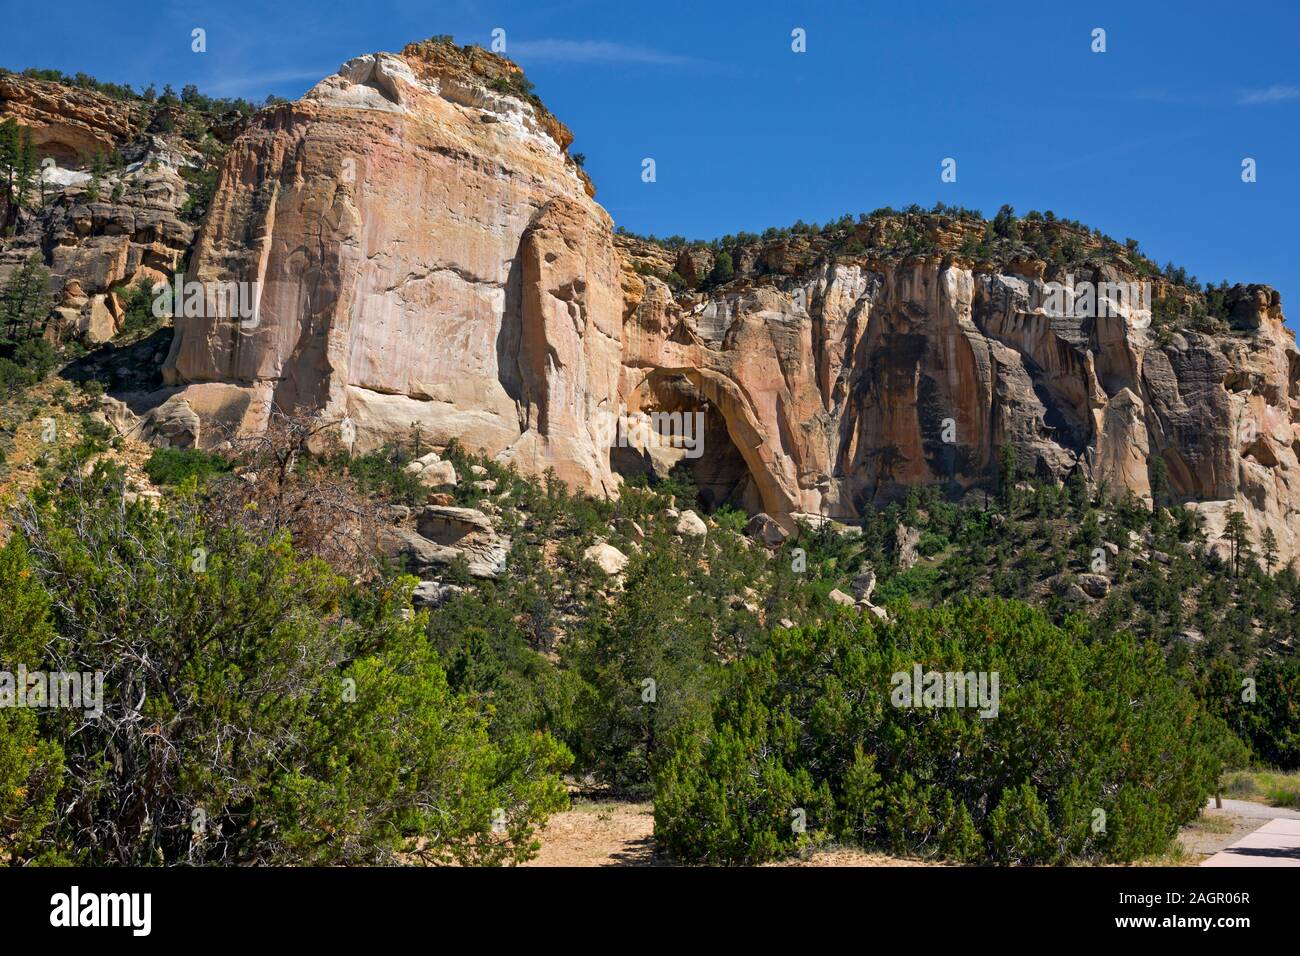 NM00207-00...NEW MEXICO - La Ventana, an arch in the El Malpain National Conservation Area located along an alternate route in the Great Divide Mounta Stock Photo